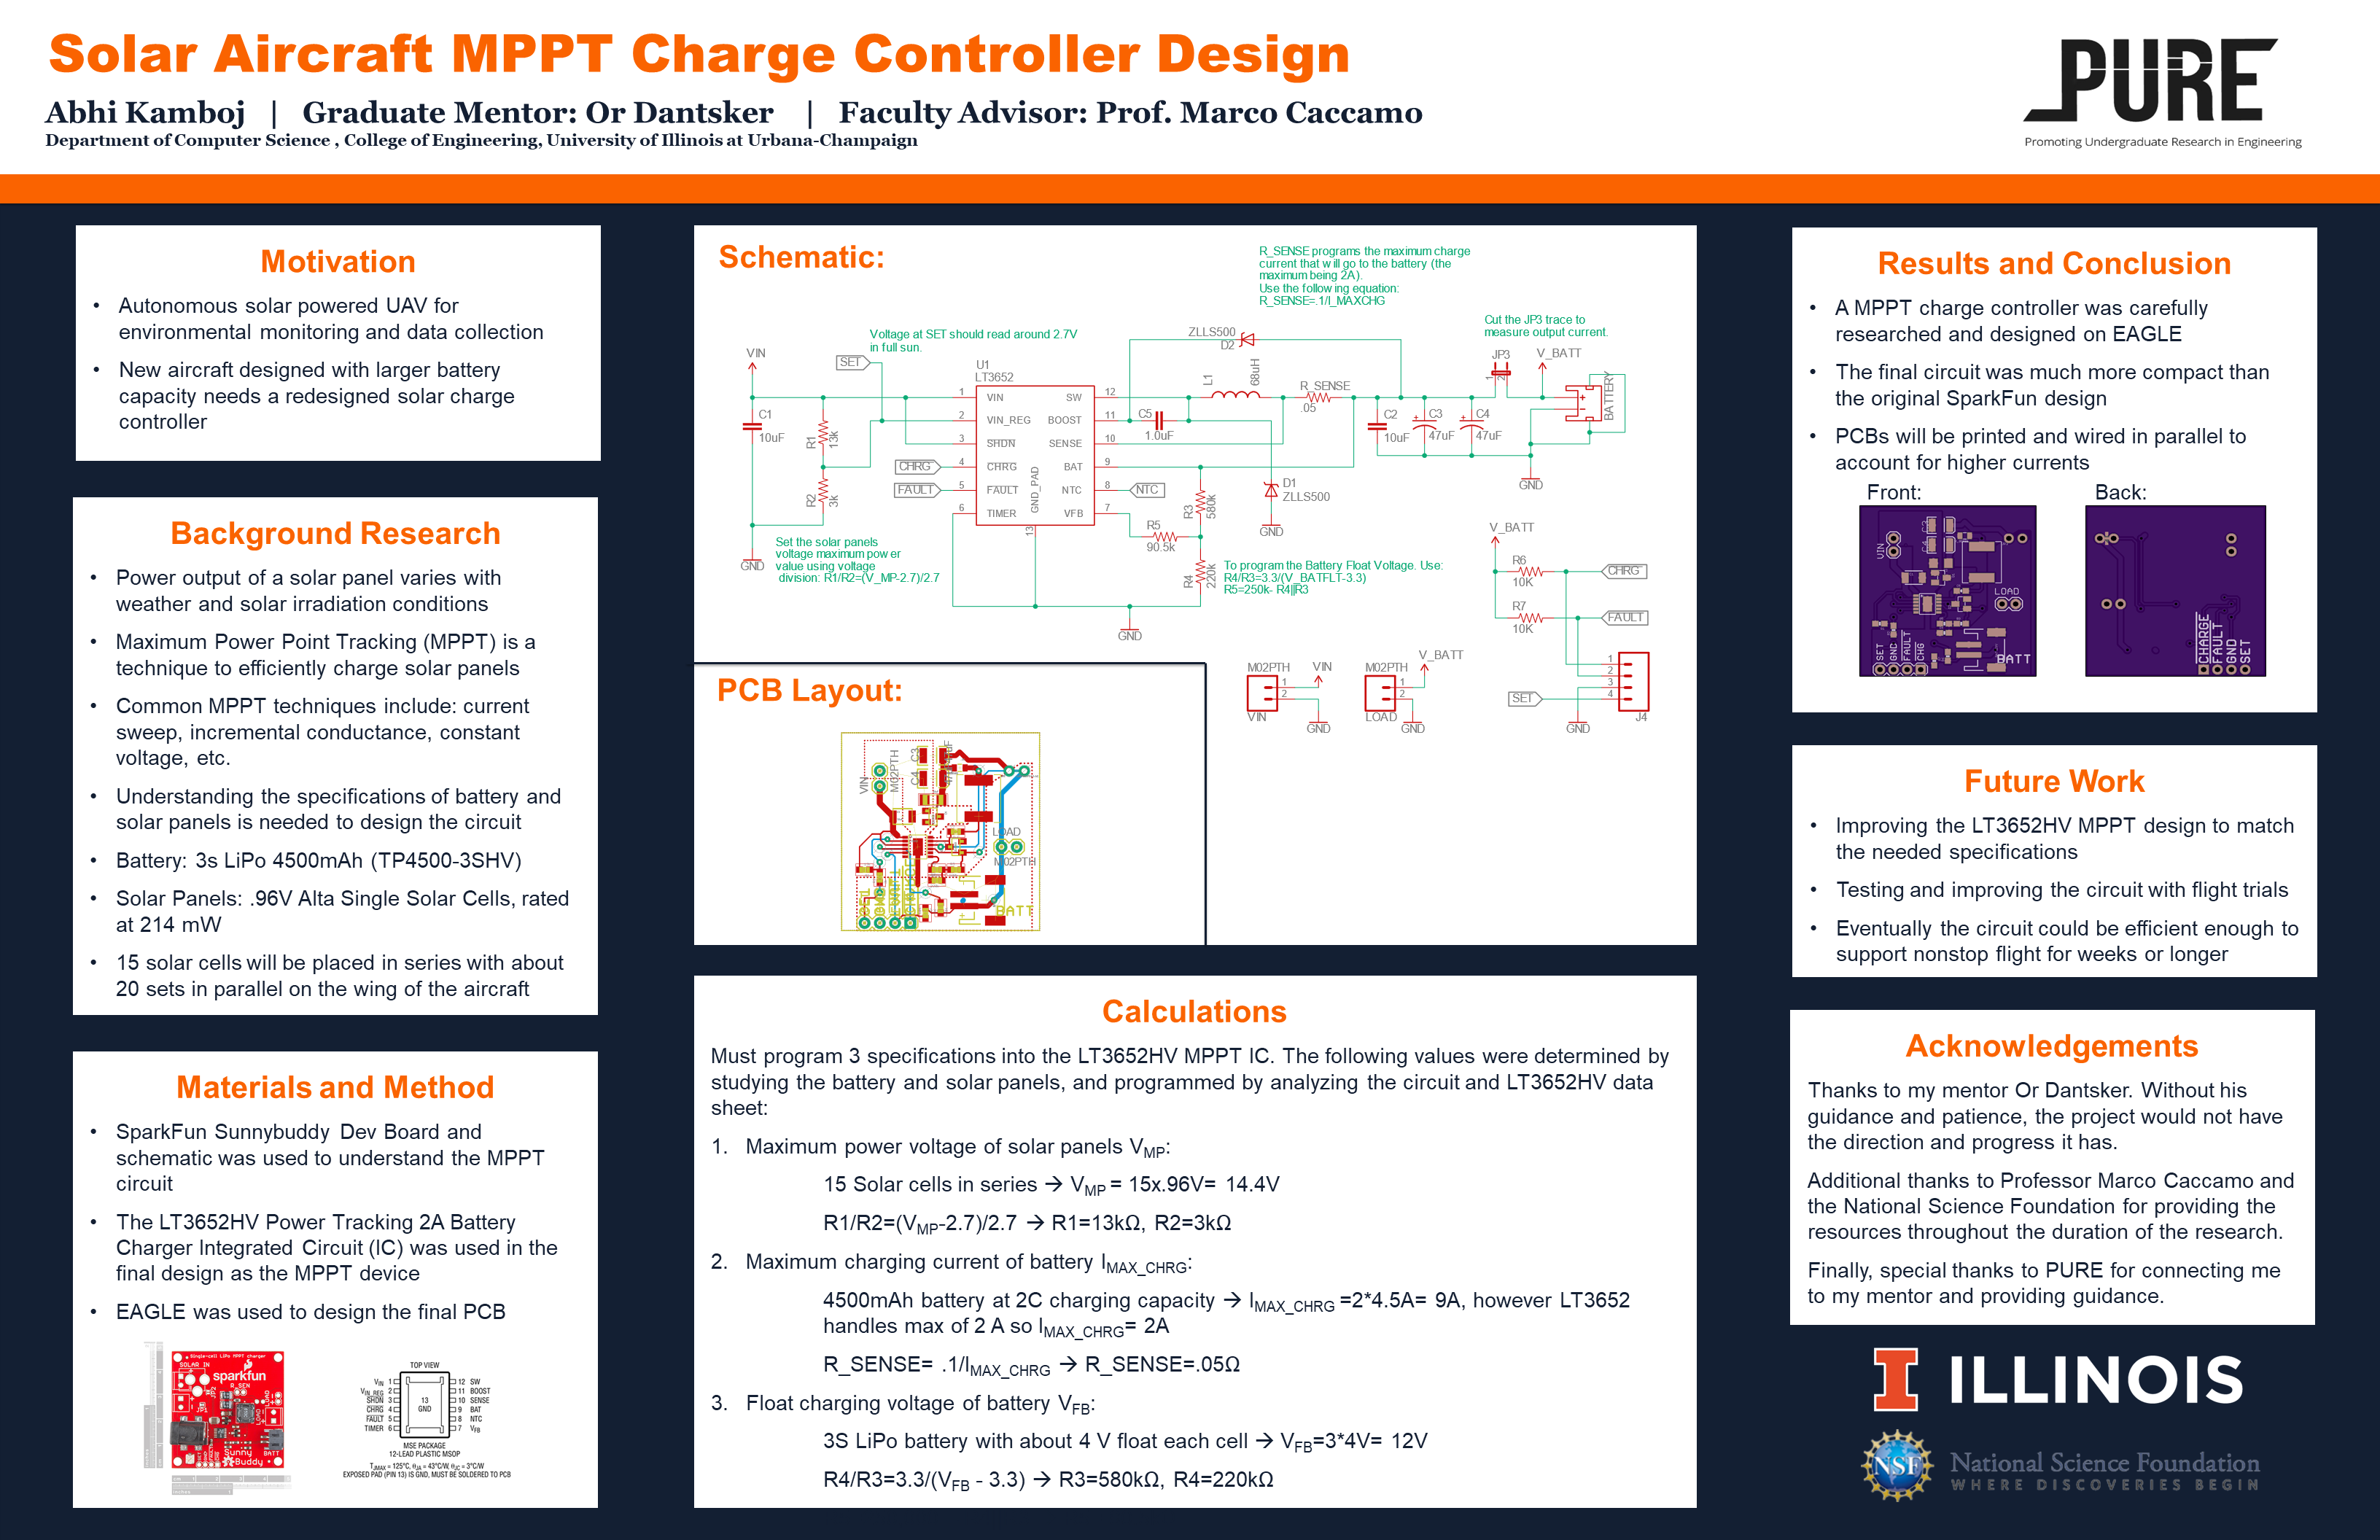 Solar MPPT Characge Controller Poster